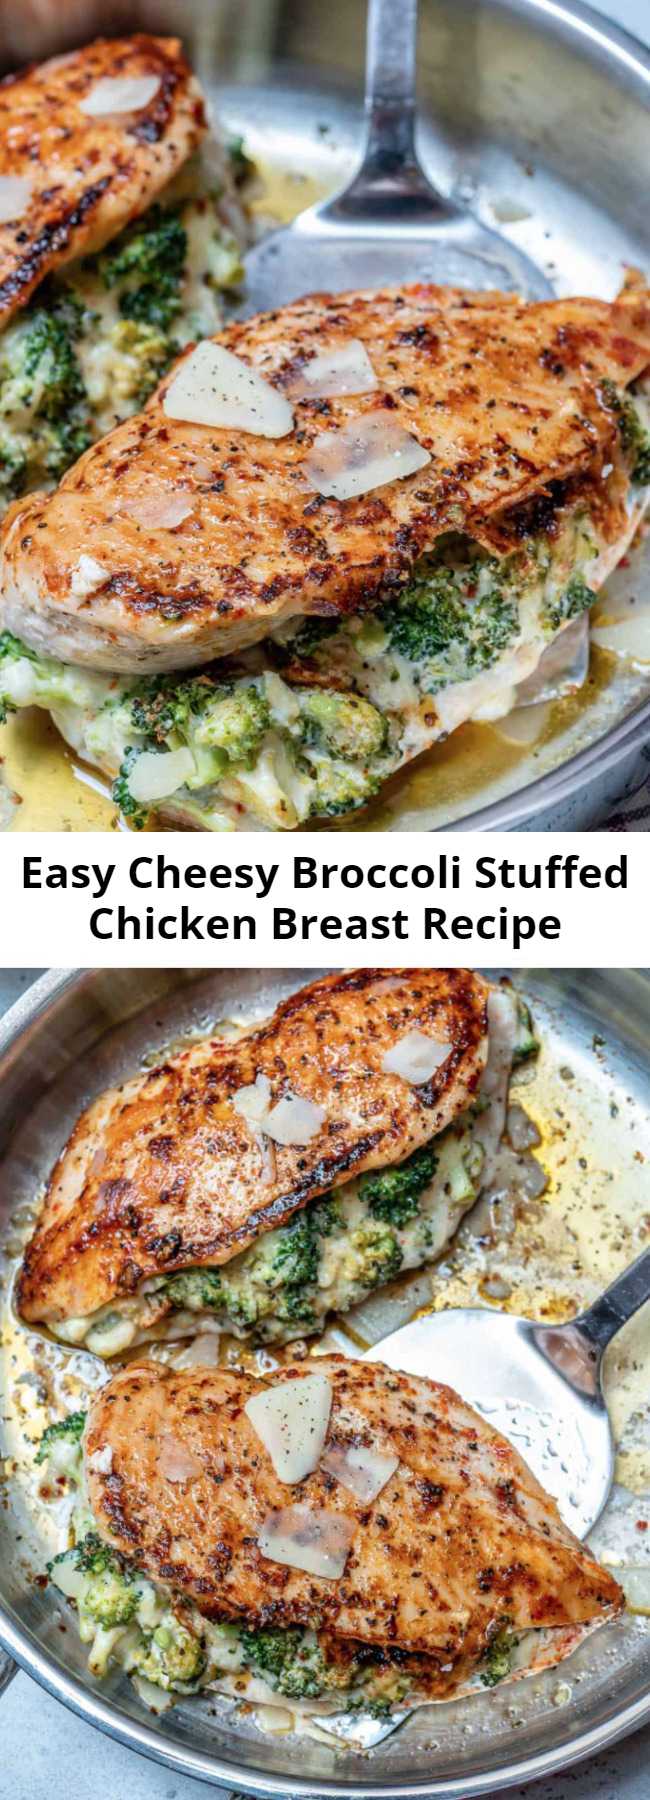 Easy Cheesy Broccoli Stuffed Chicken Breast Recipe - These stuffed chicken breasts are easy to make and delicious that’s loaded with a cheese and broccoli mixture for a perfect low carb and tasty meal. Chicken breast stuffed with a cheesy broccoli mixture, seared then baked to perfection.